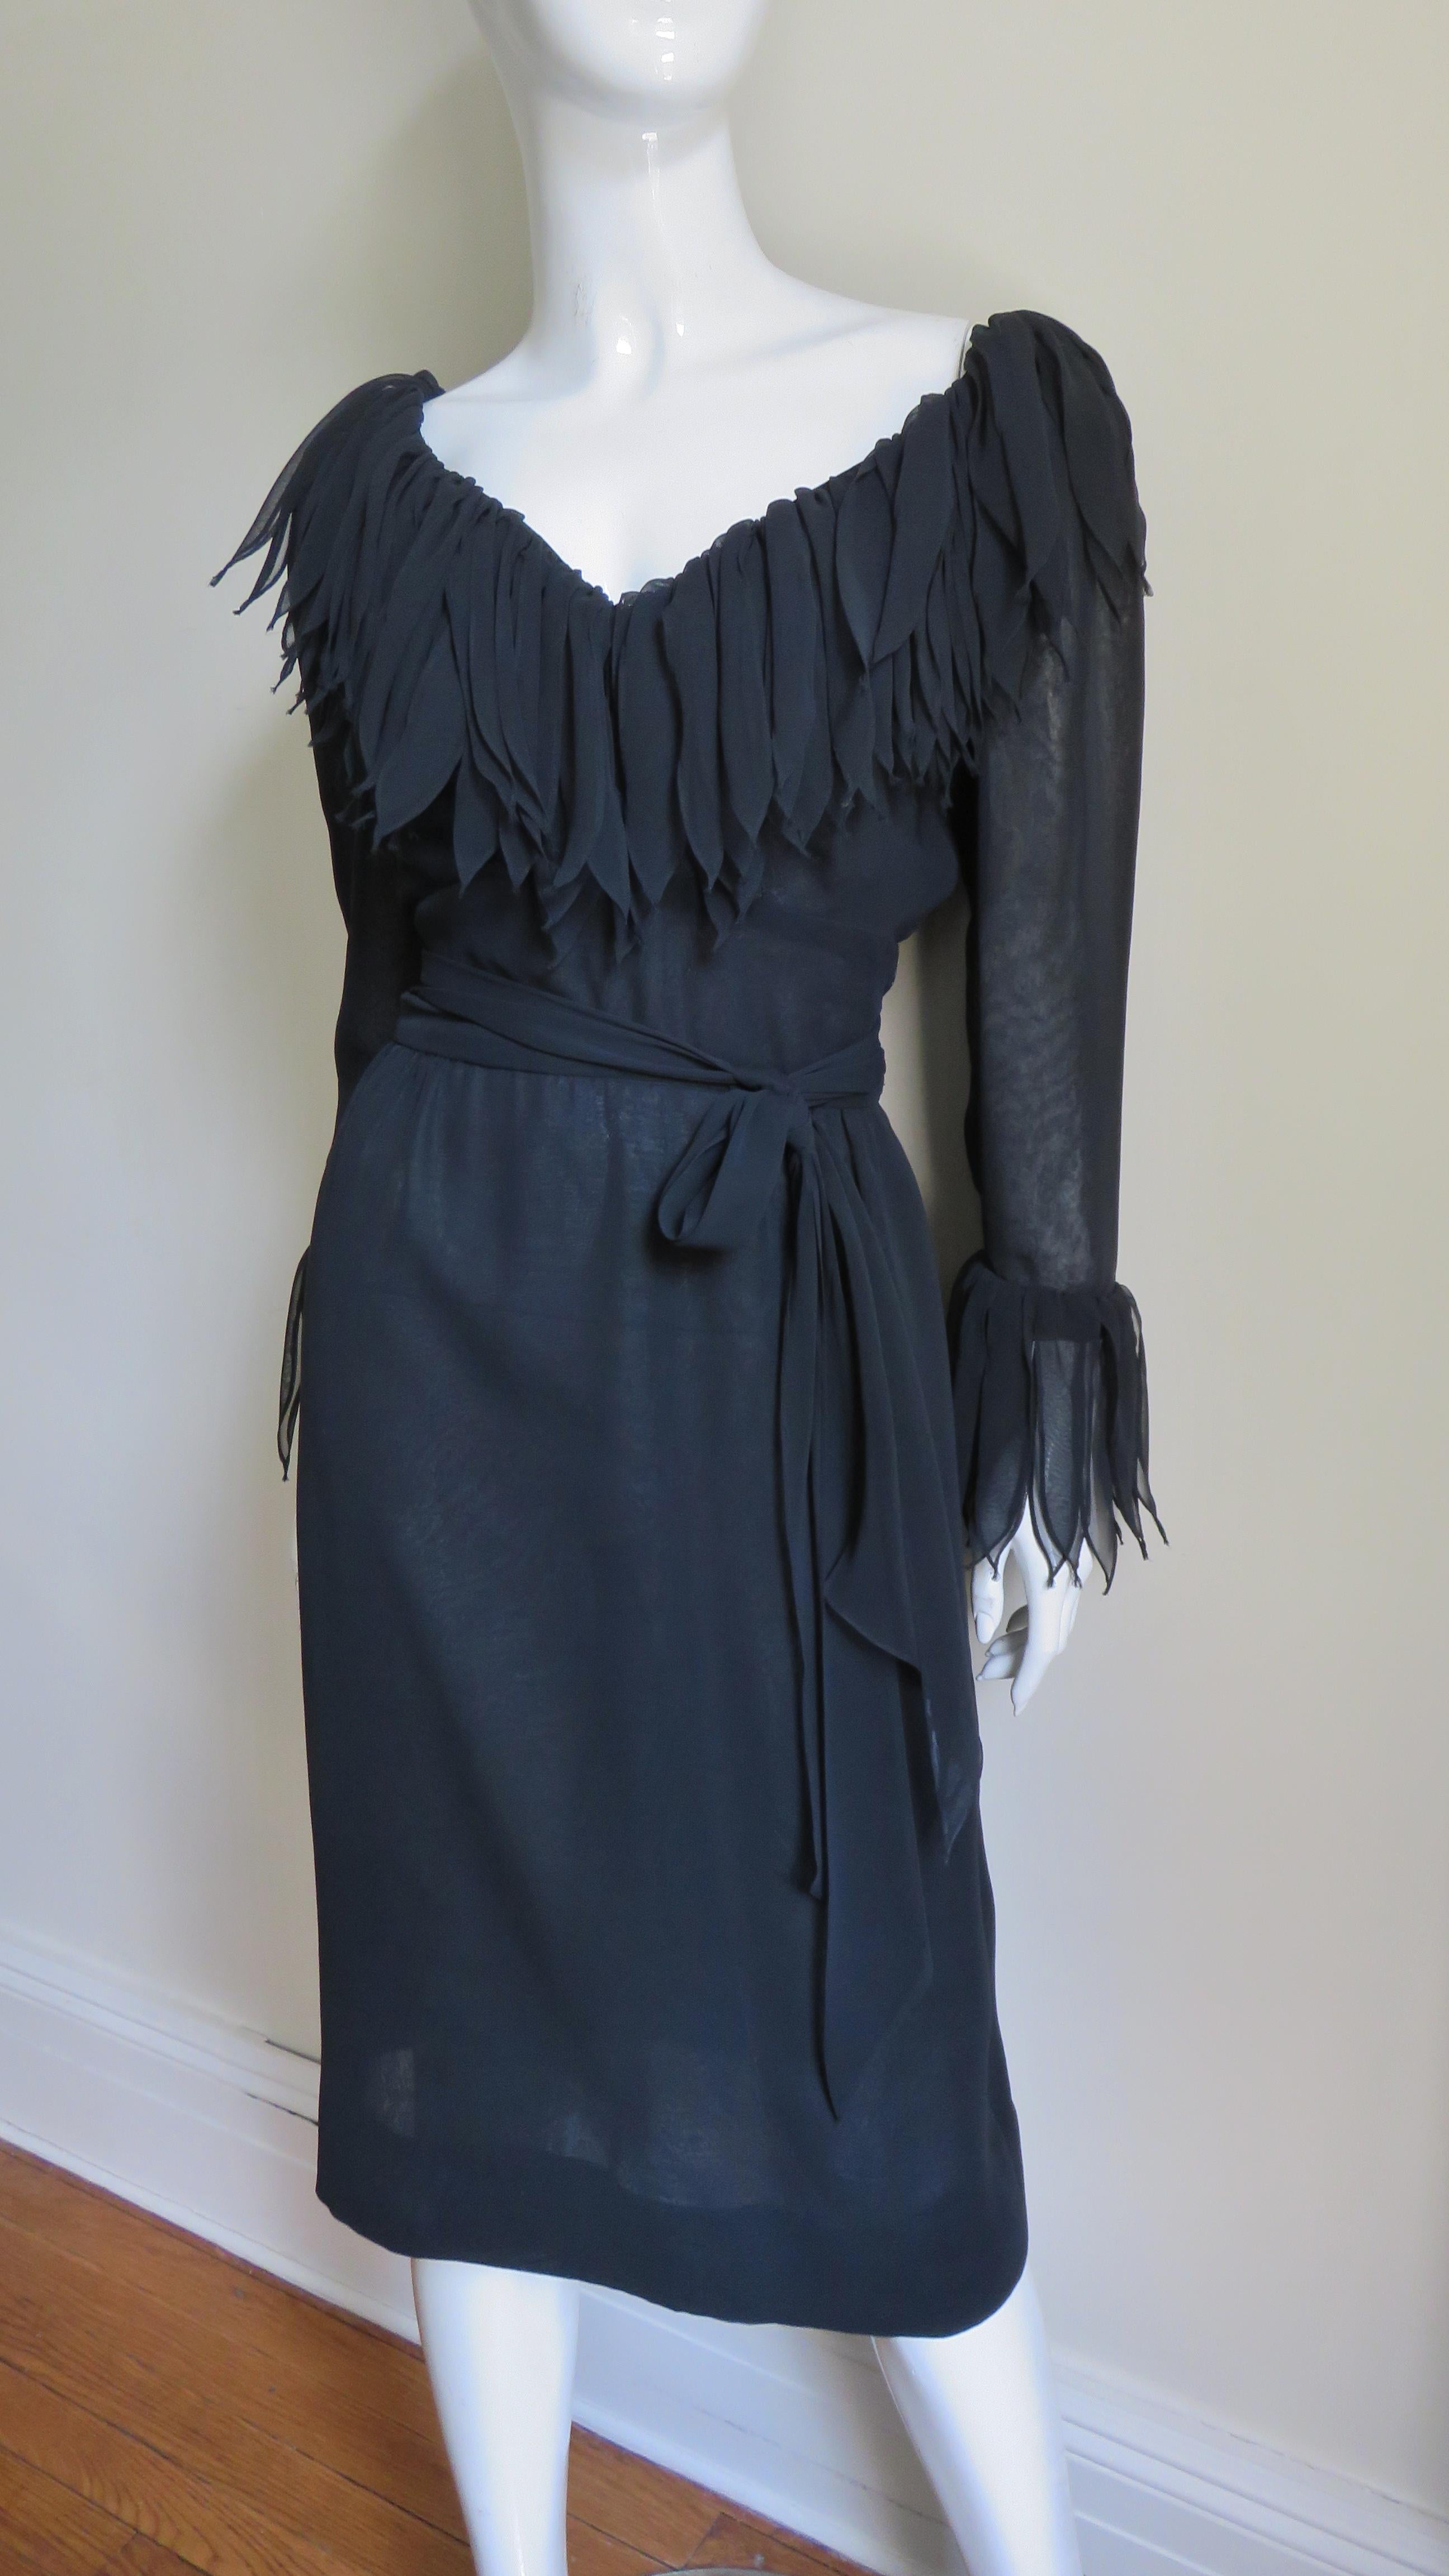 An incredible black silk dress by William Travilla.  It is semi fitted with a wrap tie belt at the waist, a V neckline and a straight skirt.  Around the neckline and cuffs there are layers of 7